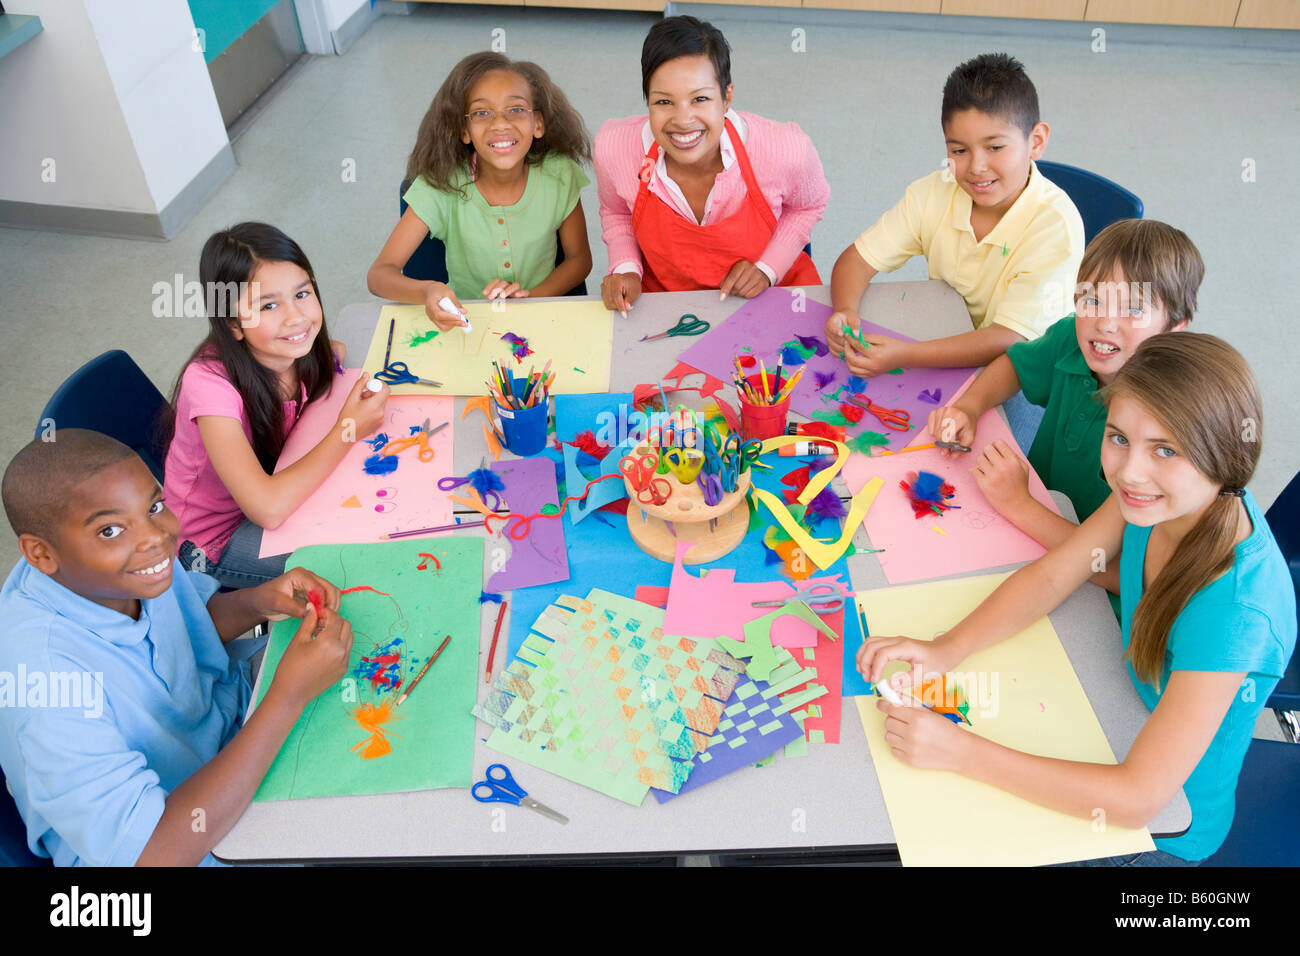 Teacher and students in art class Stock Photo